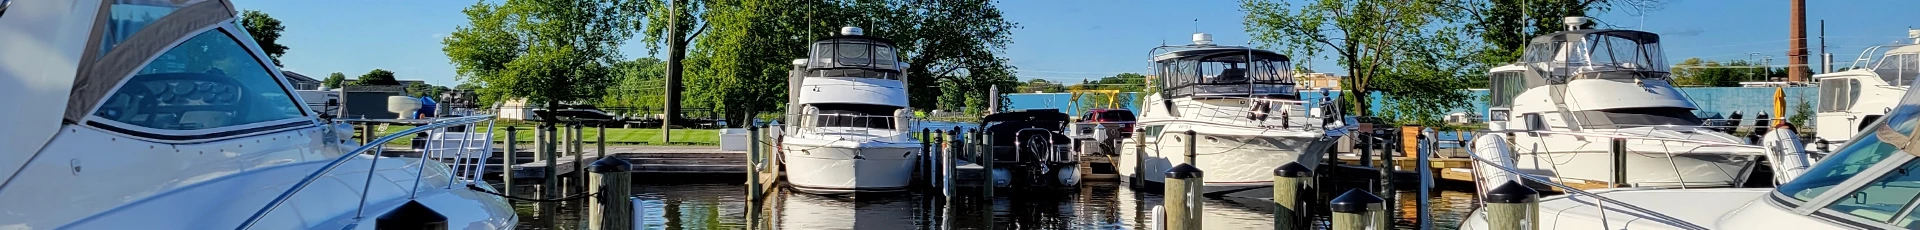 Boat Removal, Dismantle and Disposal in Toms River New Jersey